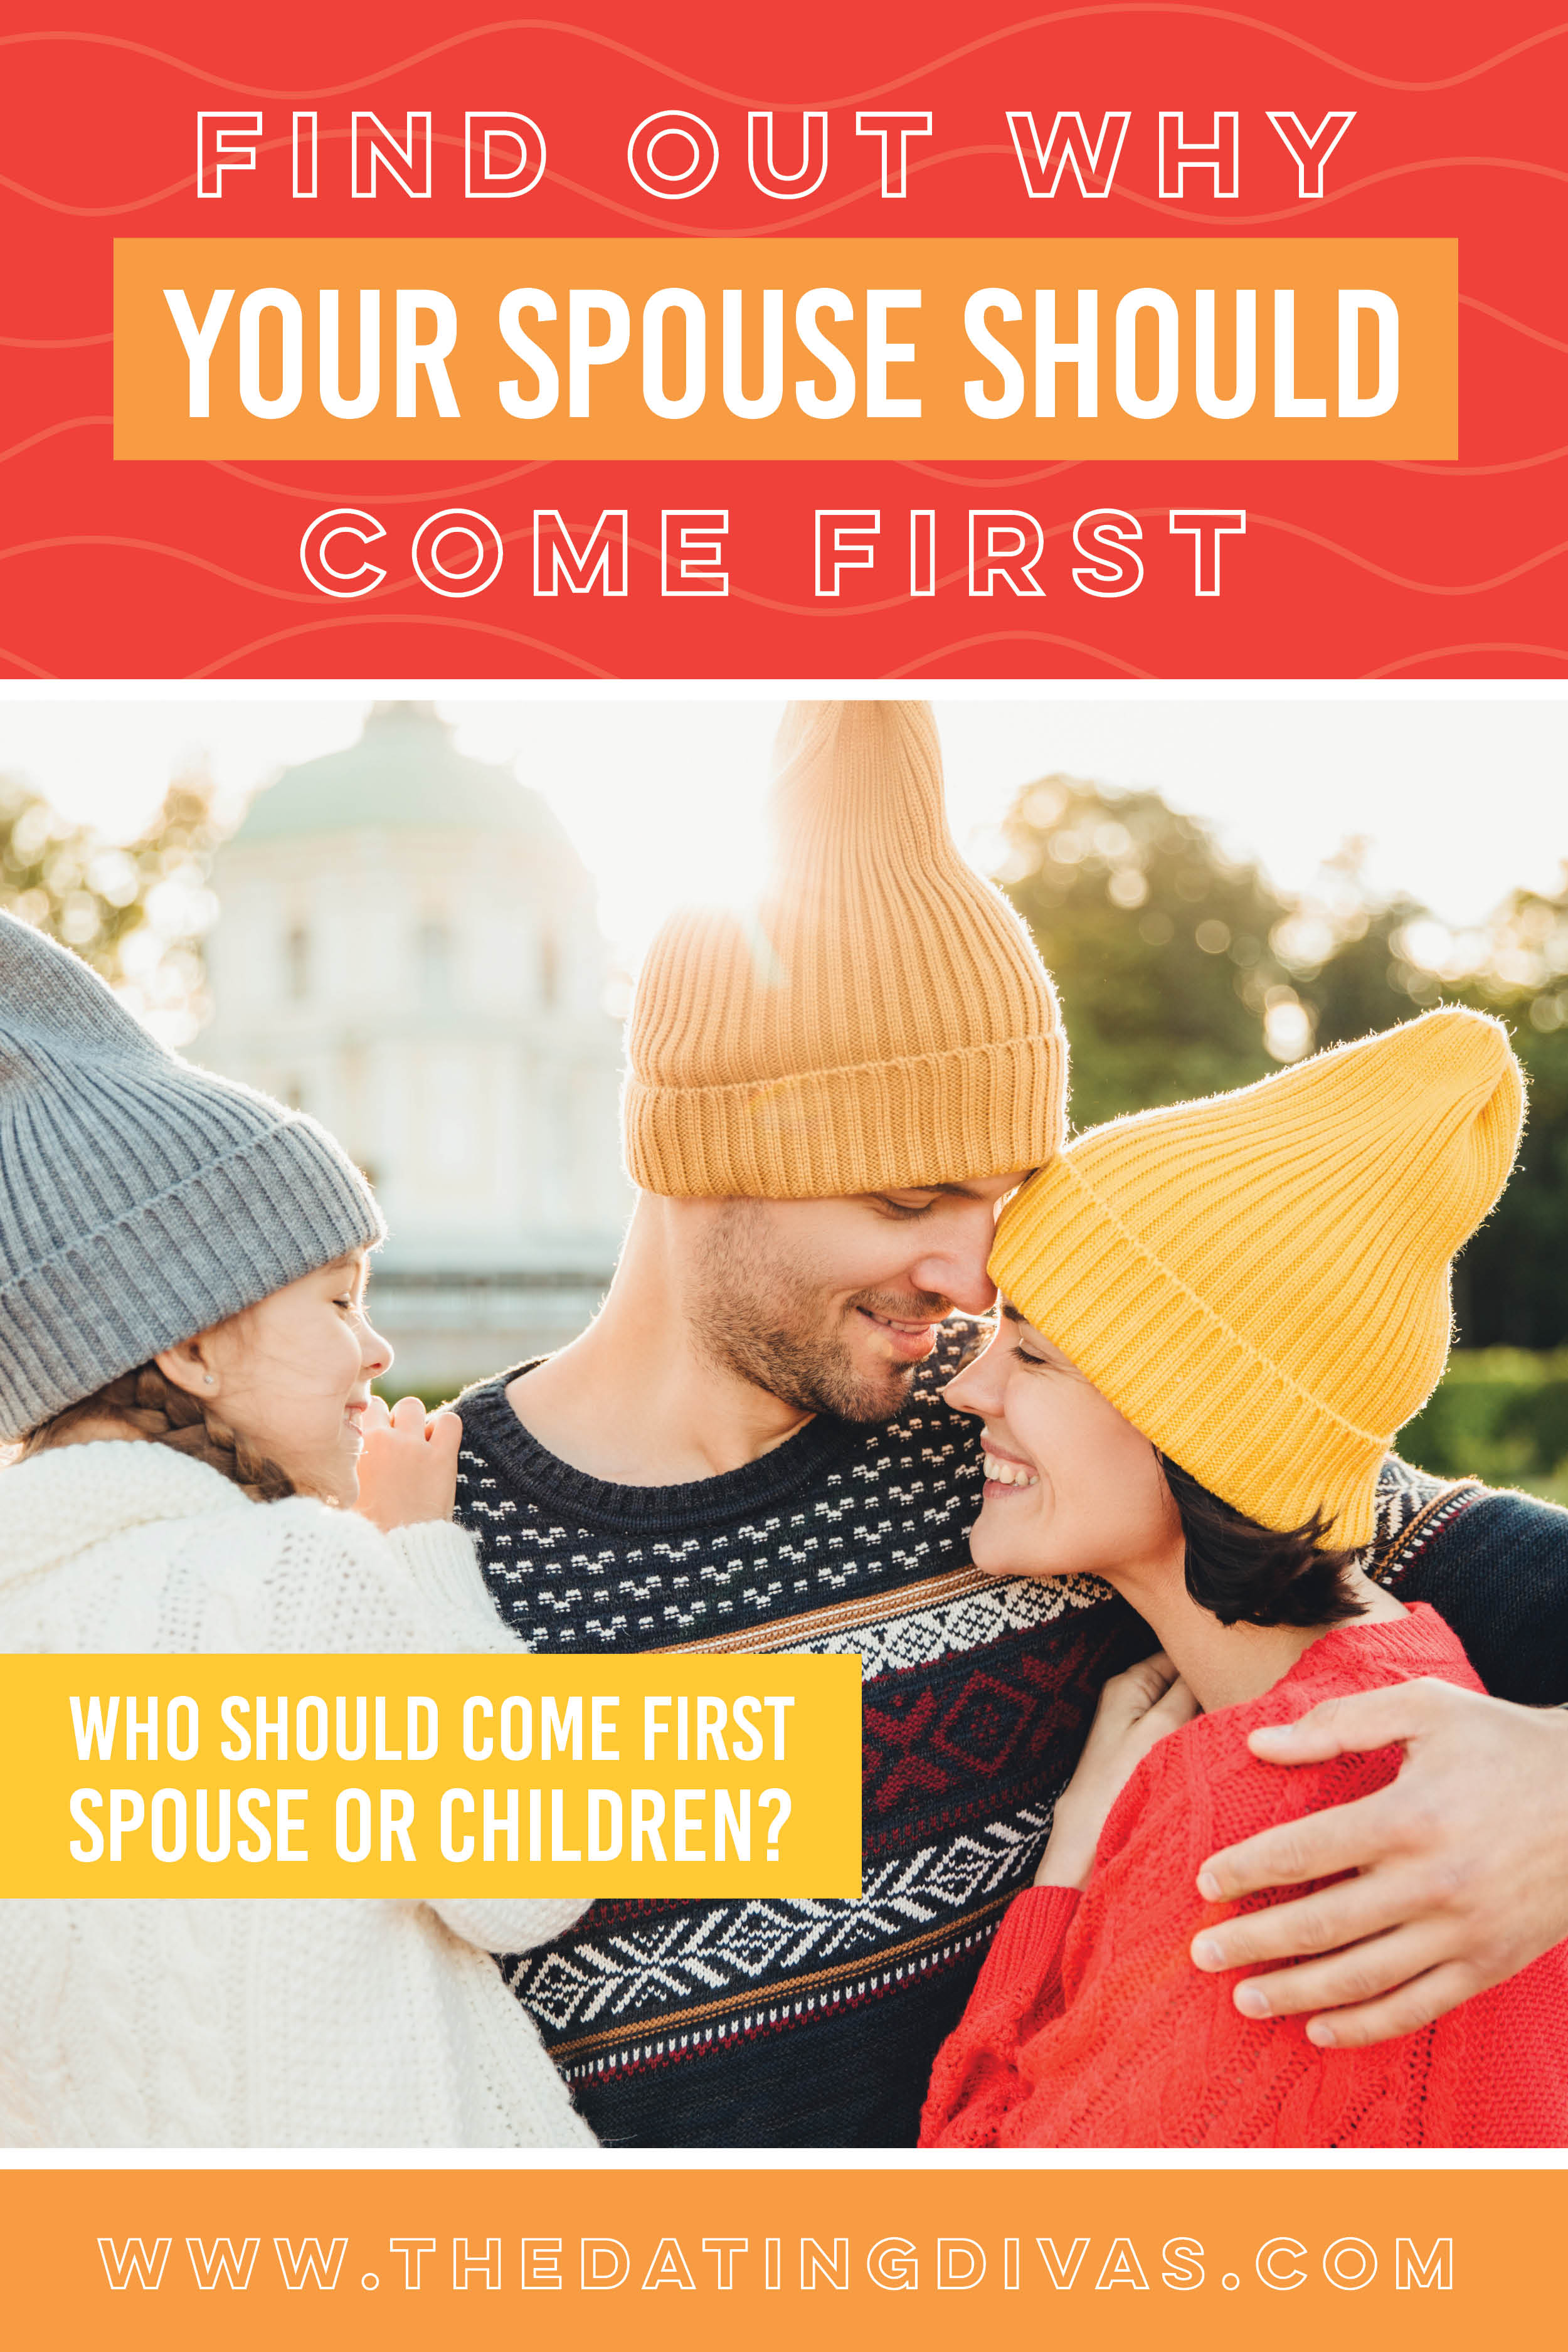 Great ideas for putting your spouse first in marriage! LOVE the idea to spoil your spouse and NOT your kids #puttingyourspousefirst #whyyourspouseshouldcomefirst